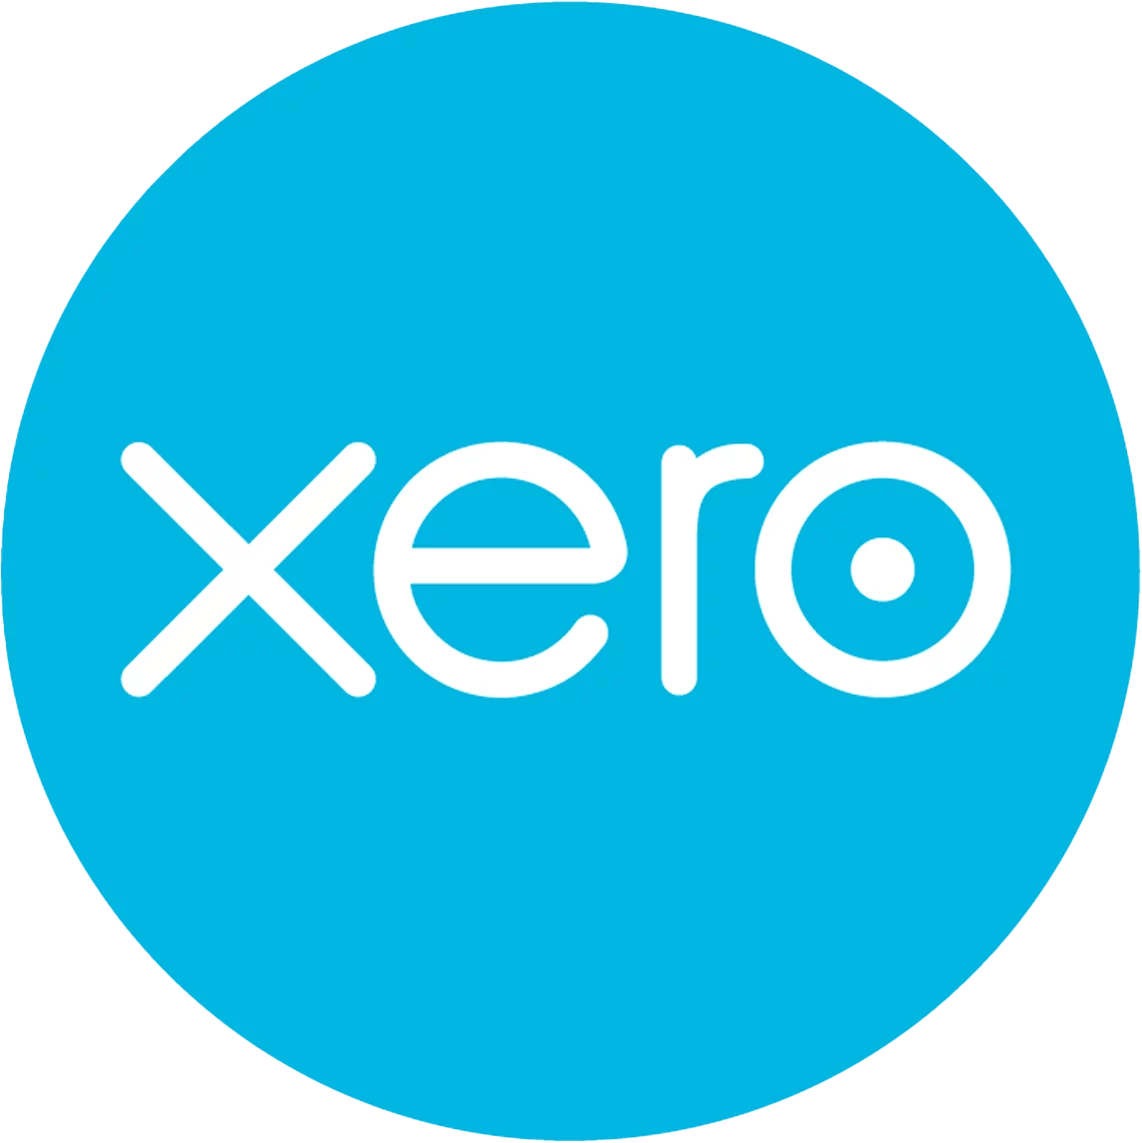 Xero is a cloud-based accounting software product that lets small-business owners manage their finances from anywhere and integrate with more than 1,000 apps.